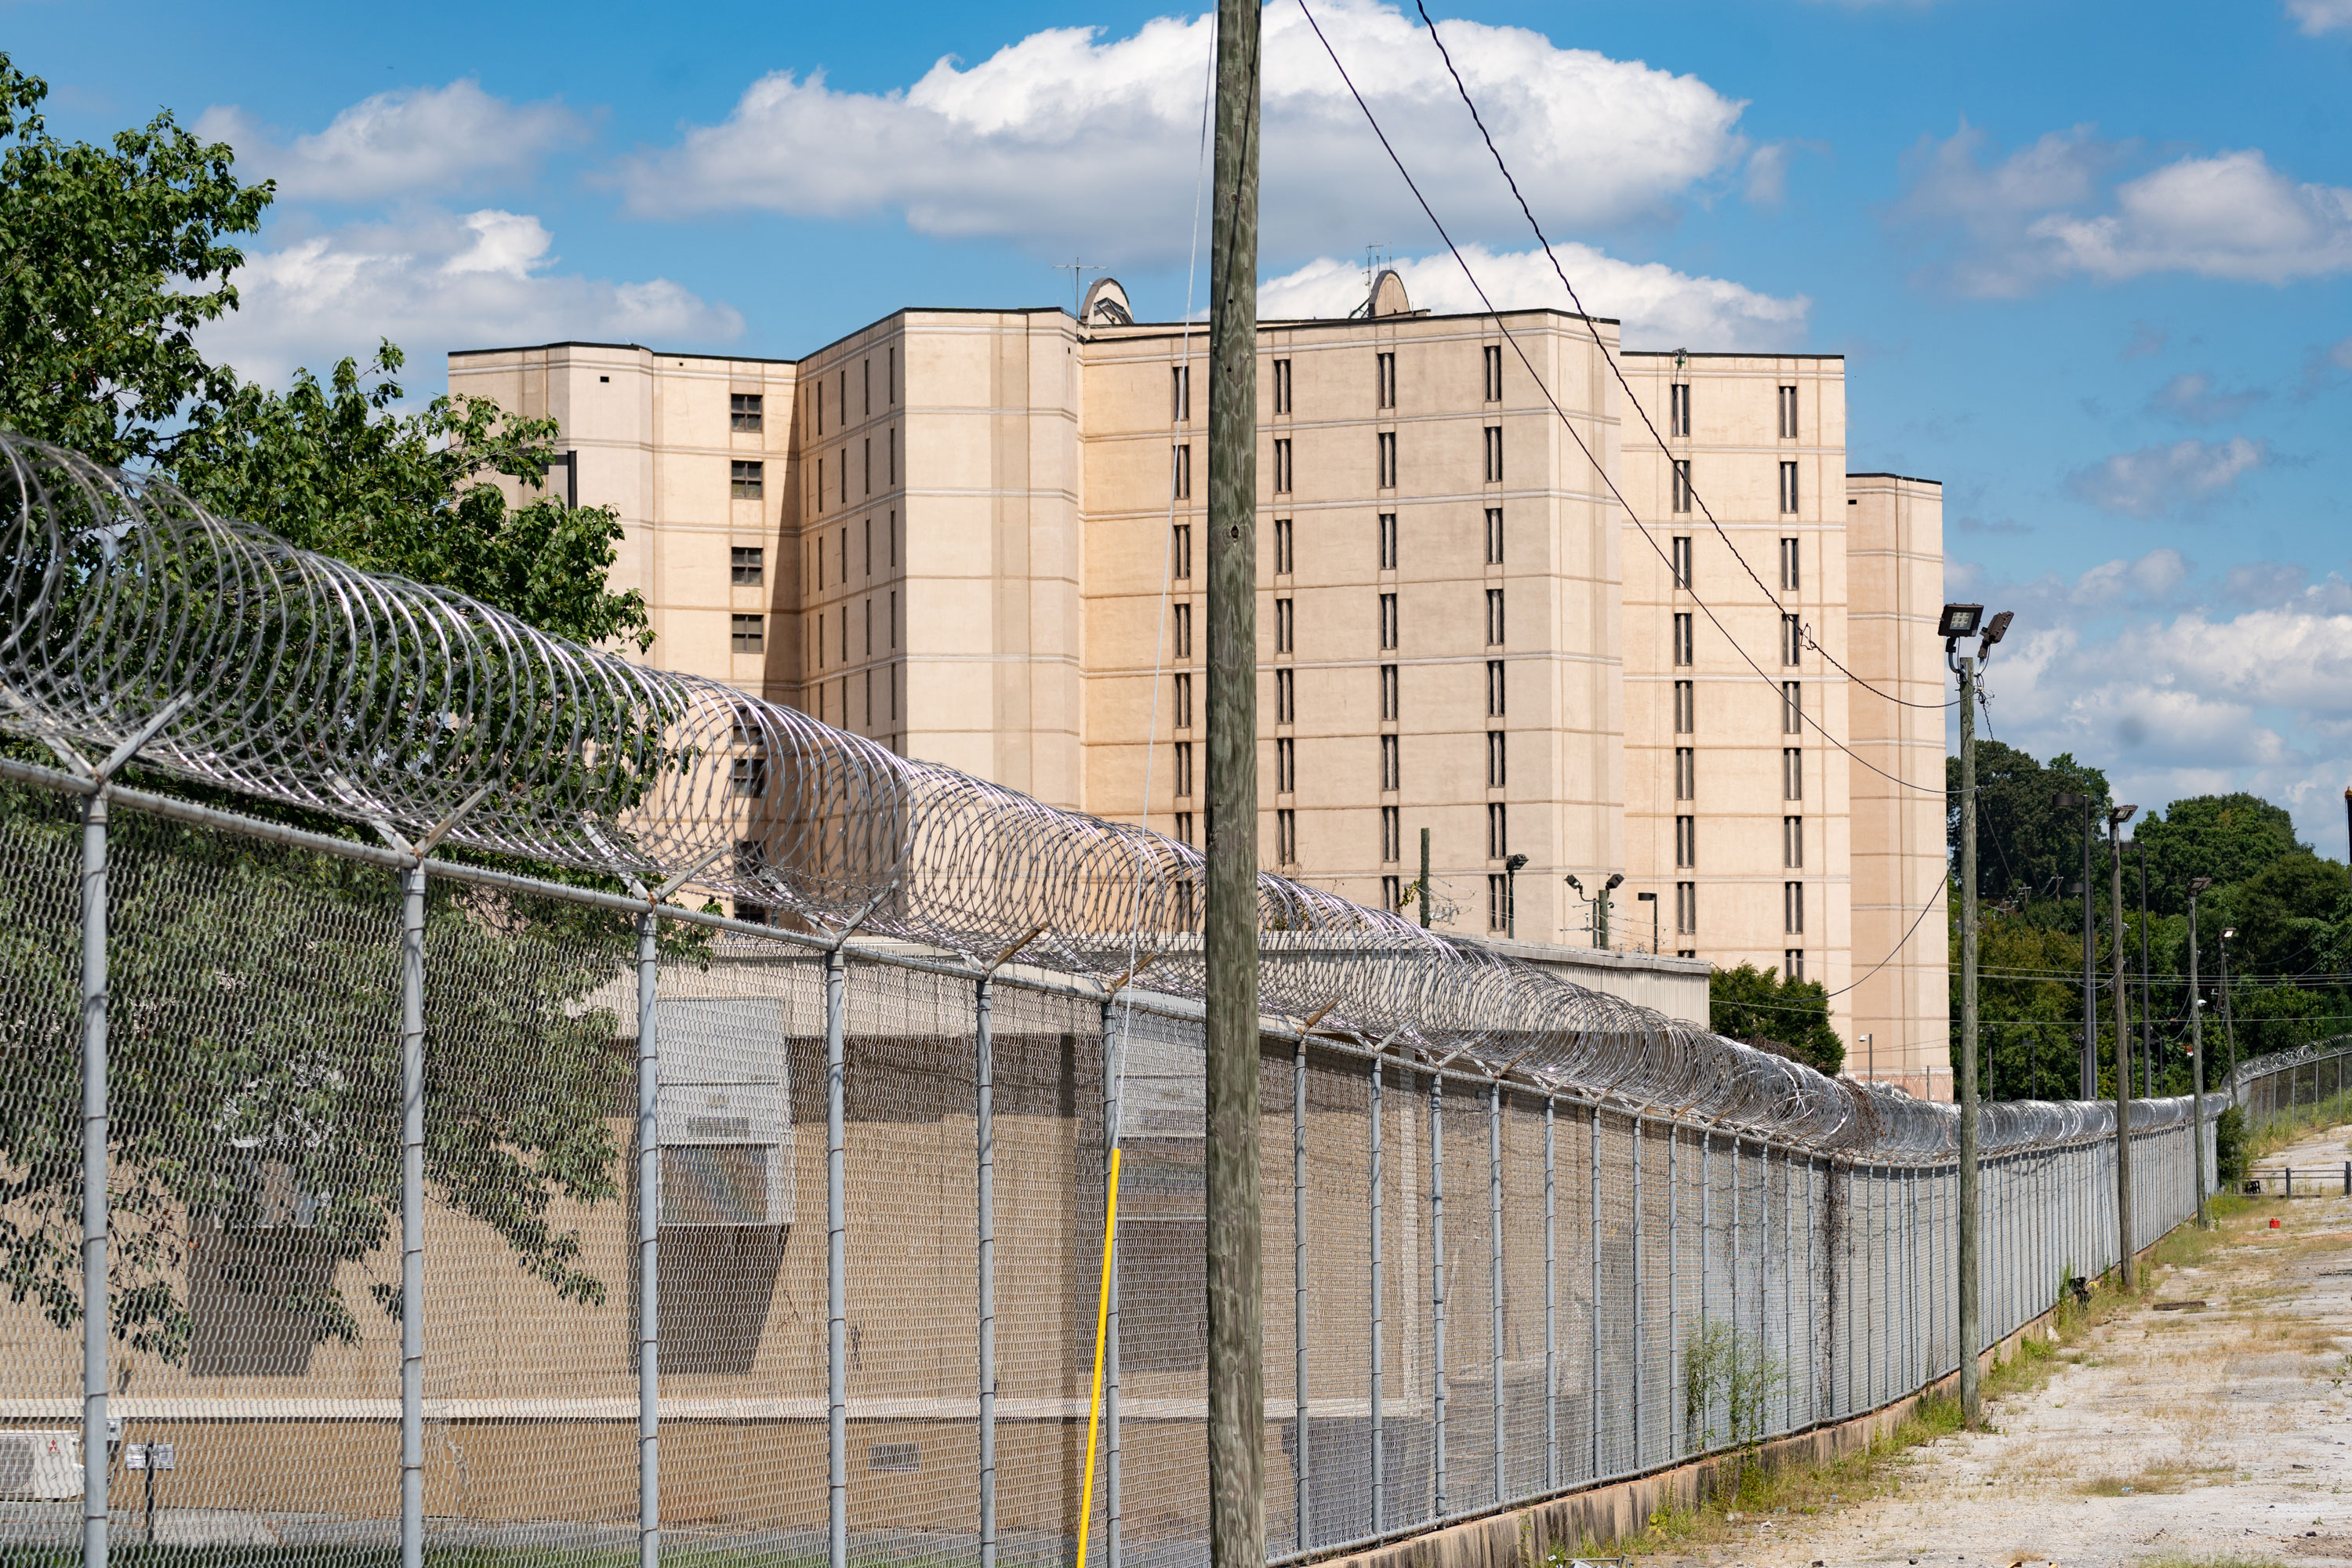 An exterior view of the Fulton County Jail in Atlanta on August 16.